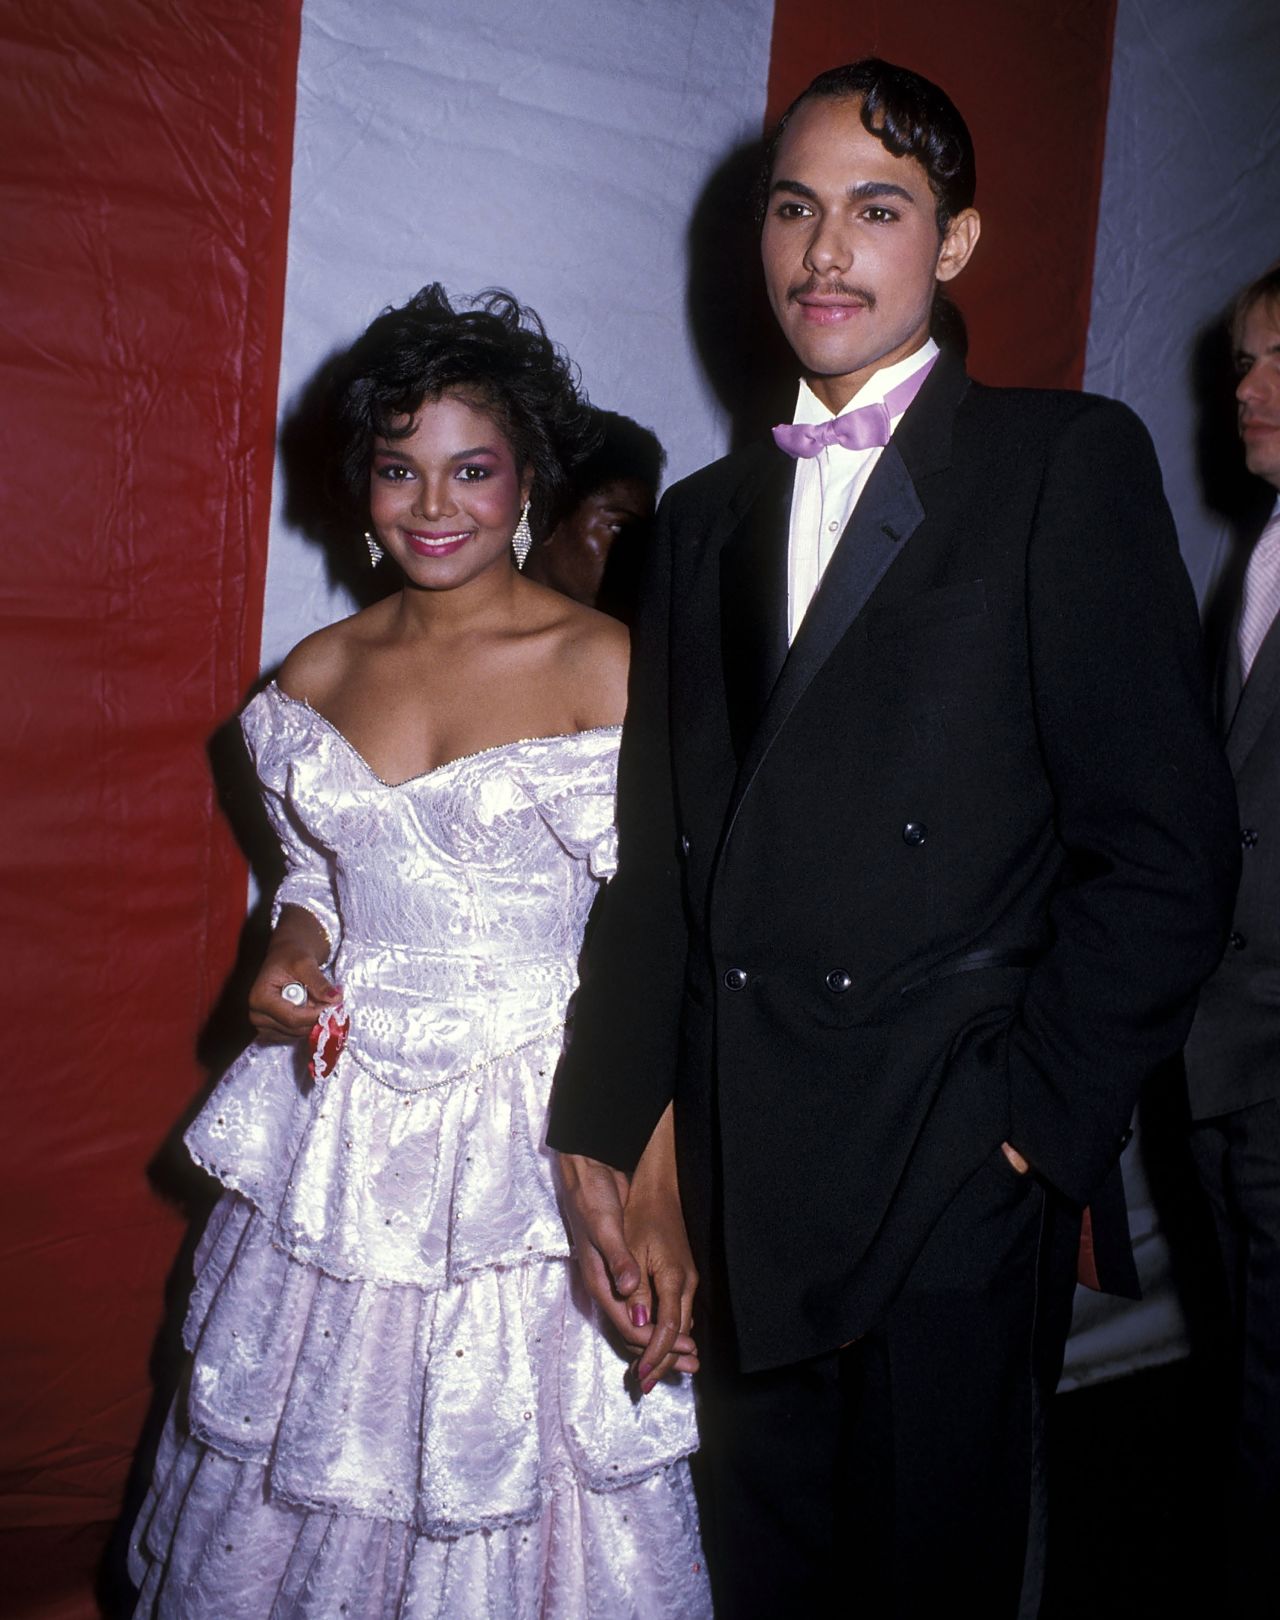 Singer Janet Jackson and her first husband, James DeBarge, attend the 12th annual American Music Awards on January 28, 1985, at the Shrine Auditorium in Los Angeles.